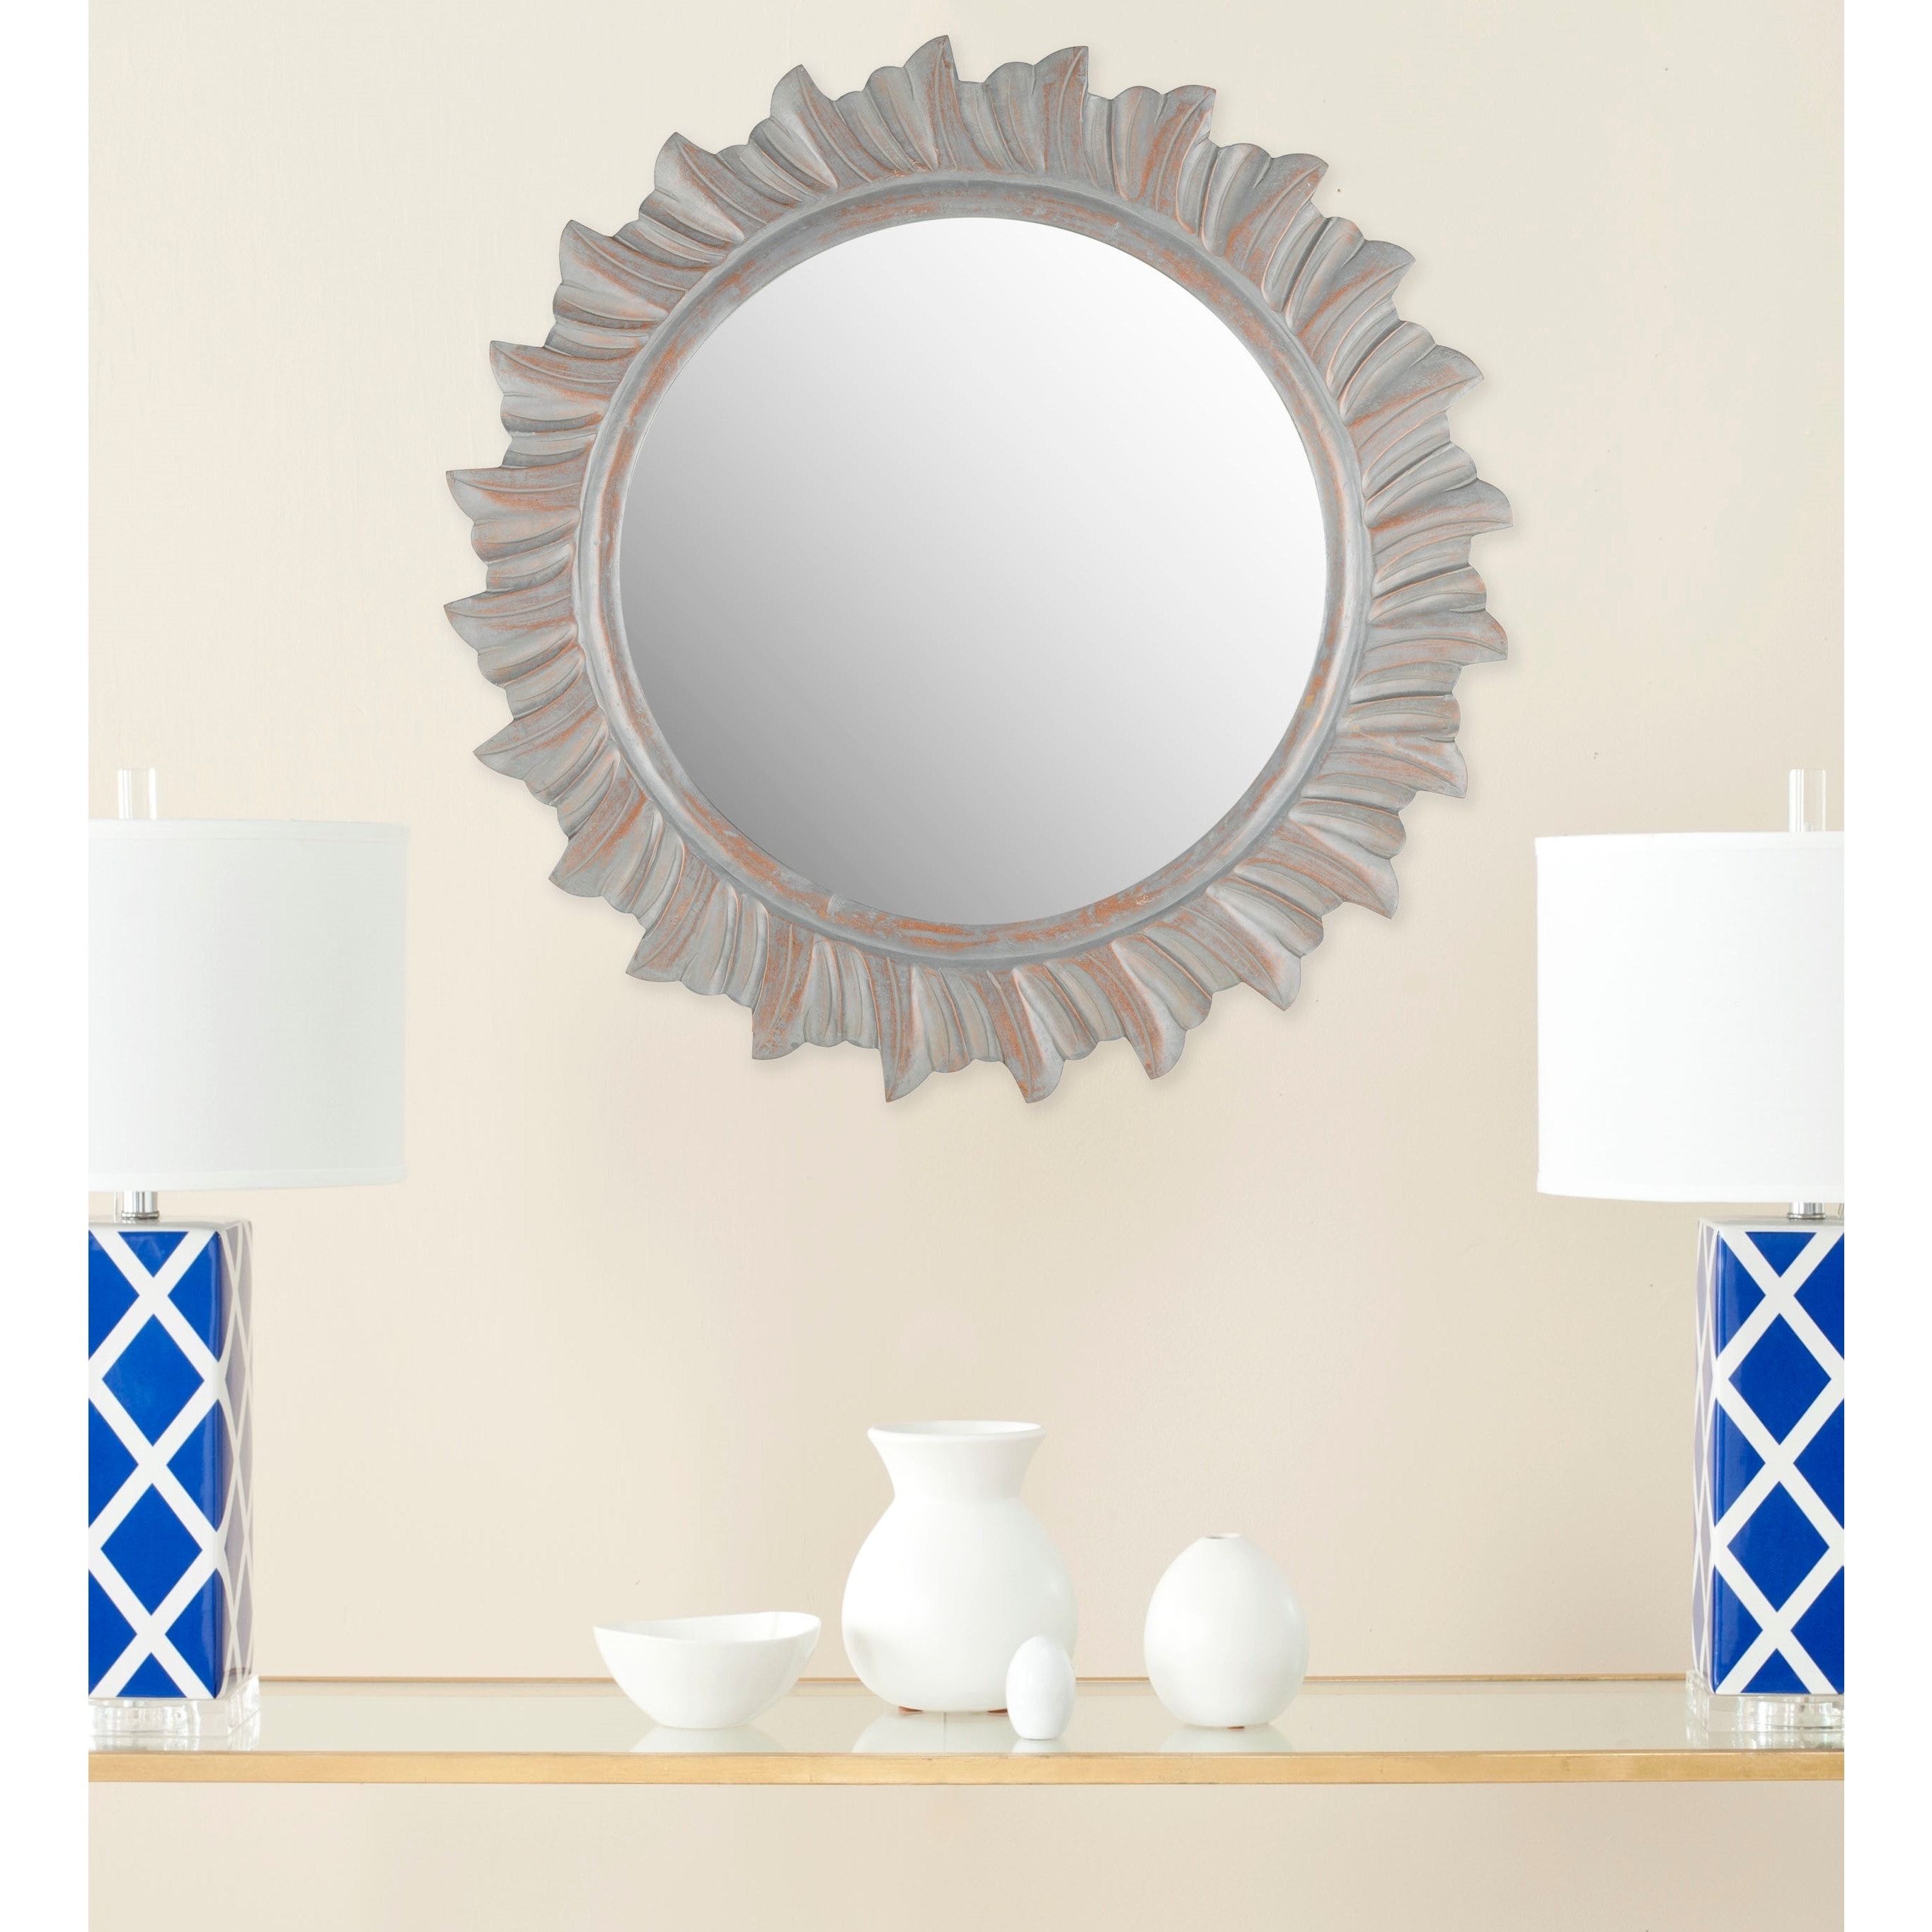 Safavieh By The Sea Burst Grey Mirror (Grey Materials Finish Grey Dimensions 29 inches high x 29 inches wide x 0.79 inches deepMirror Only Dimensions 20 inches diameterThis product will ship to you in 1 box.Furniture arrives fully assembled )